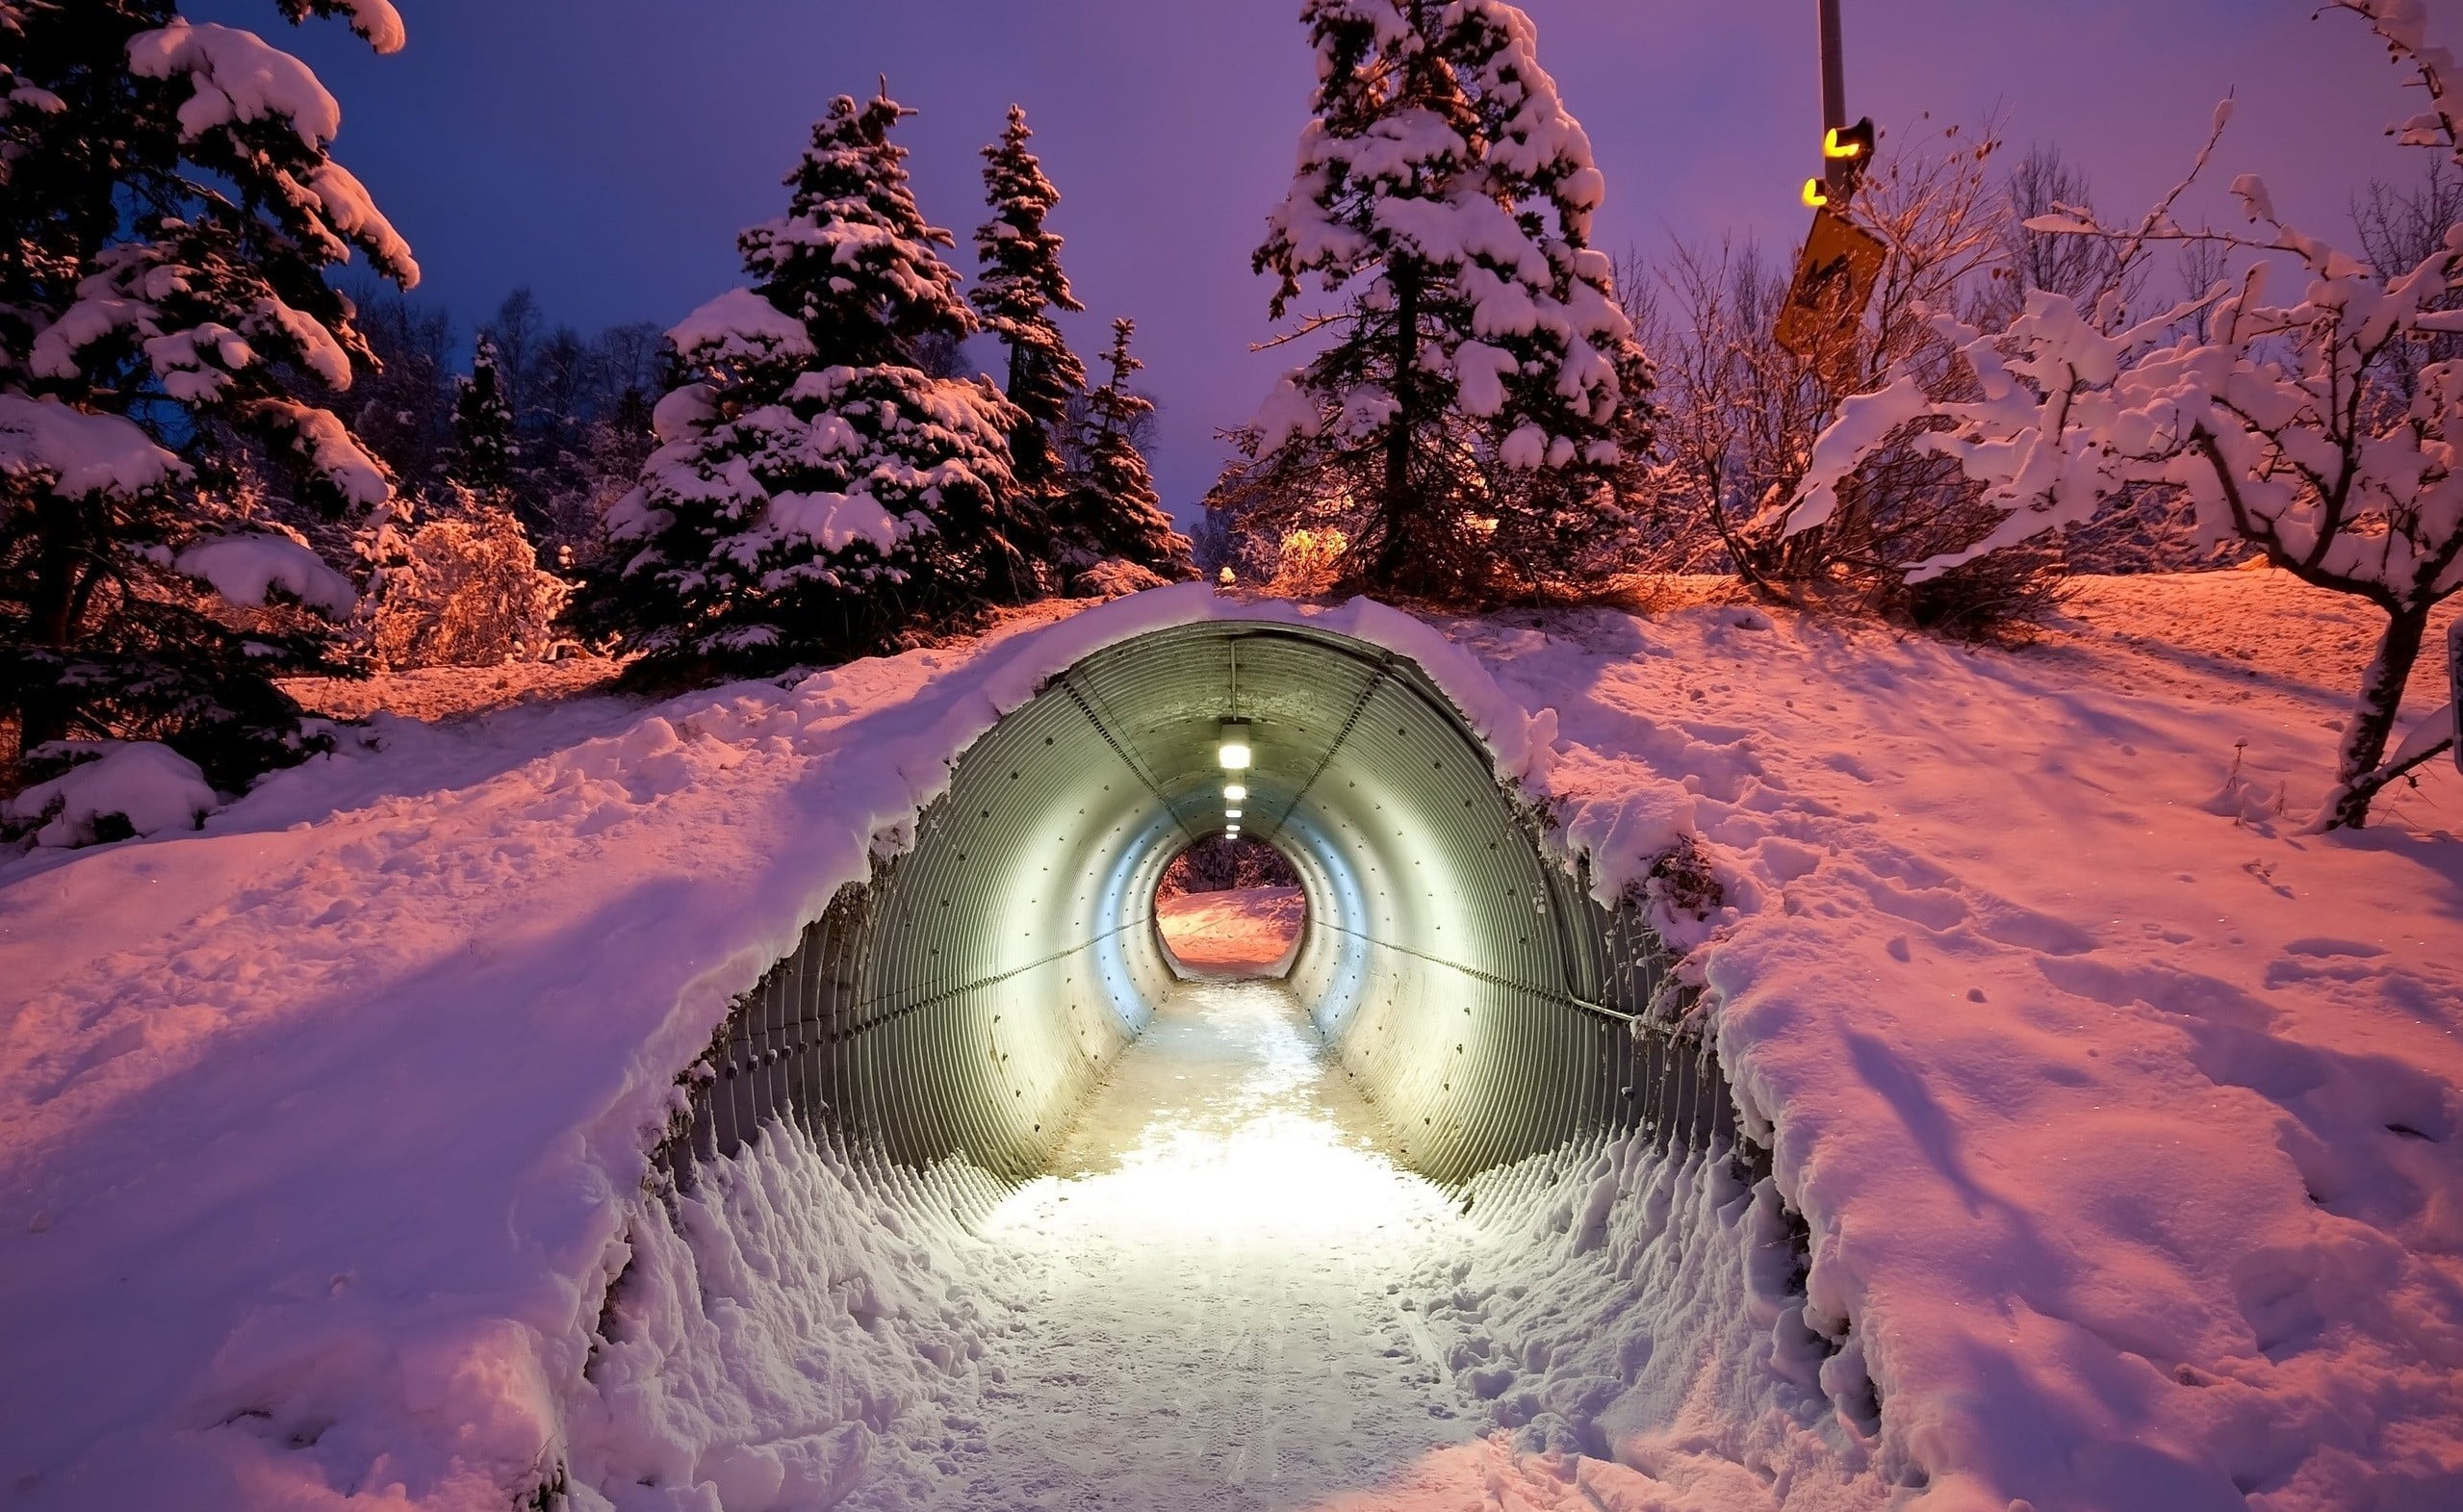 gray steel tunnel, photography, nature, winter, trees